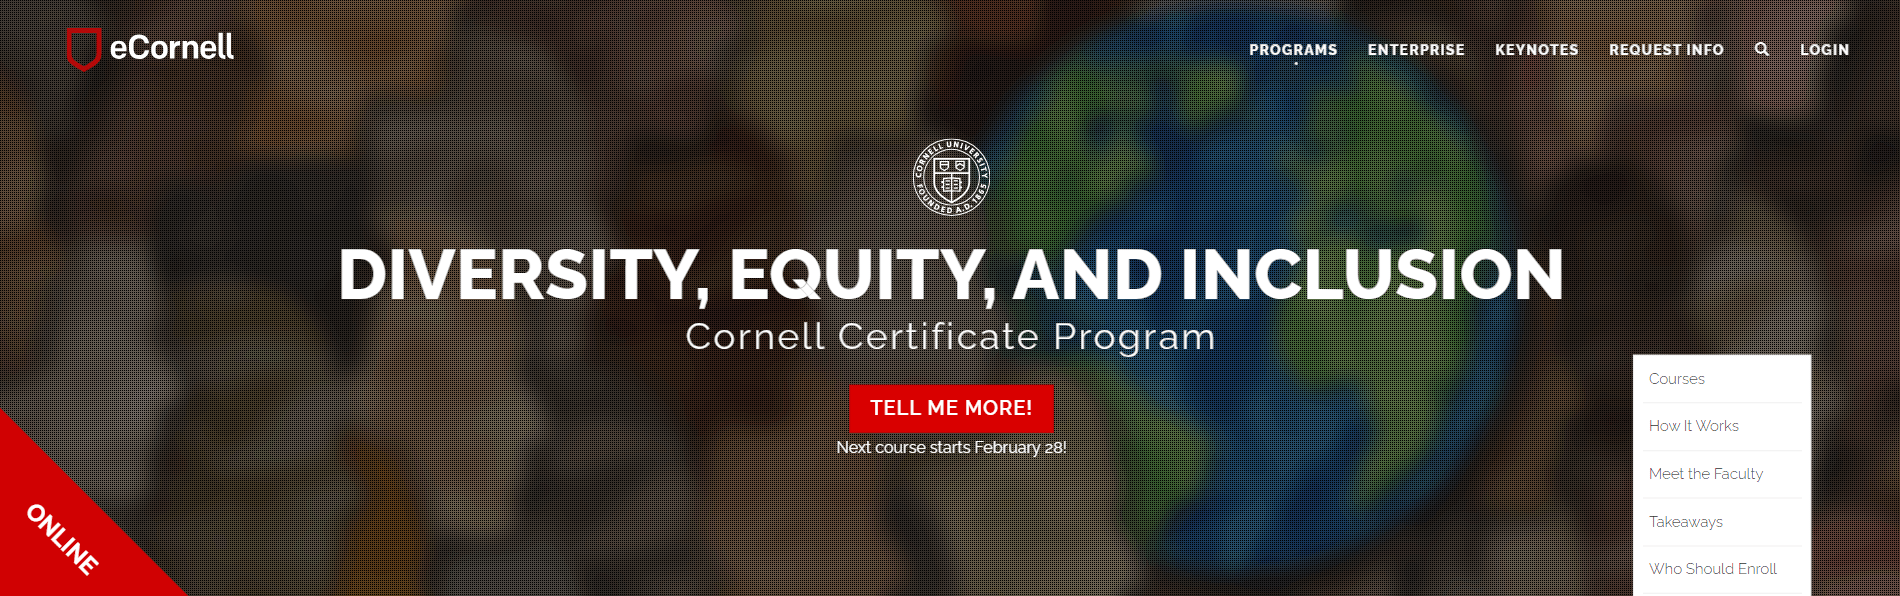 eCornell Diversity Equity and Inclusion